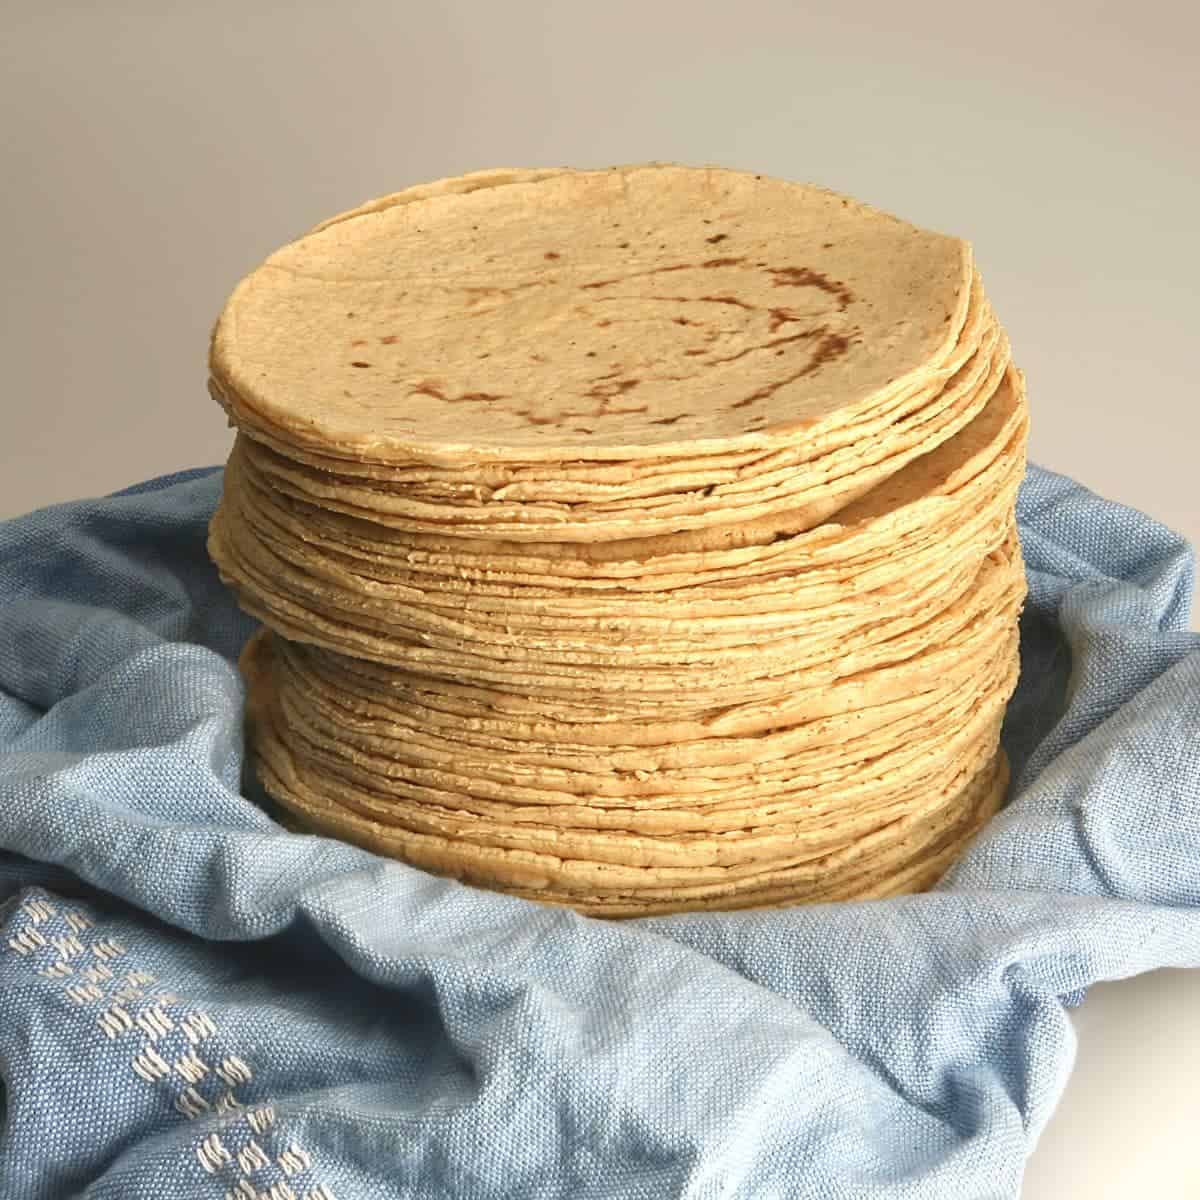 Vegan corn tortillas in a tall stack on top of a blue dish towel.